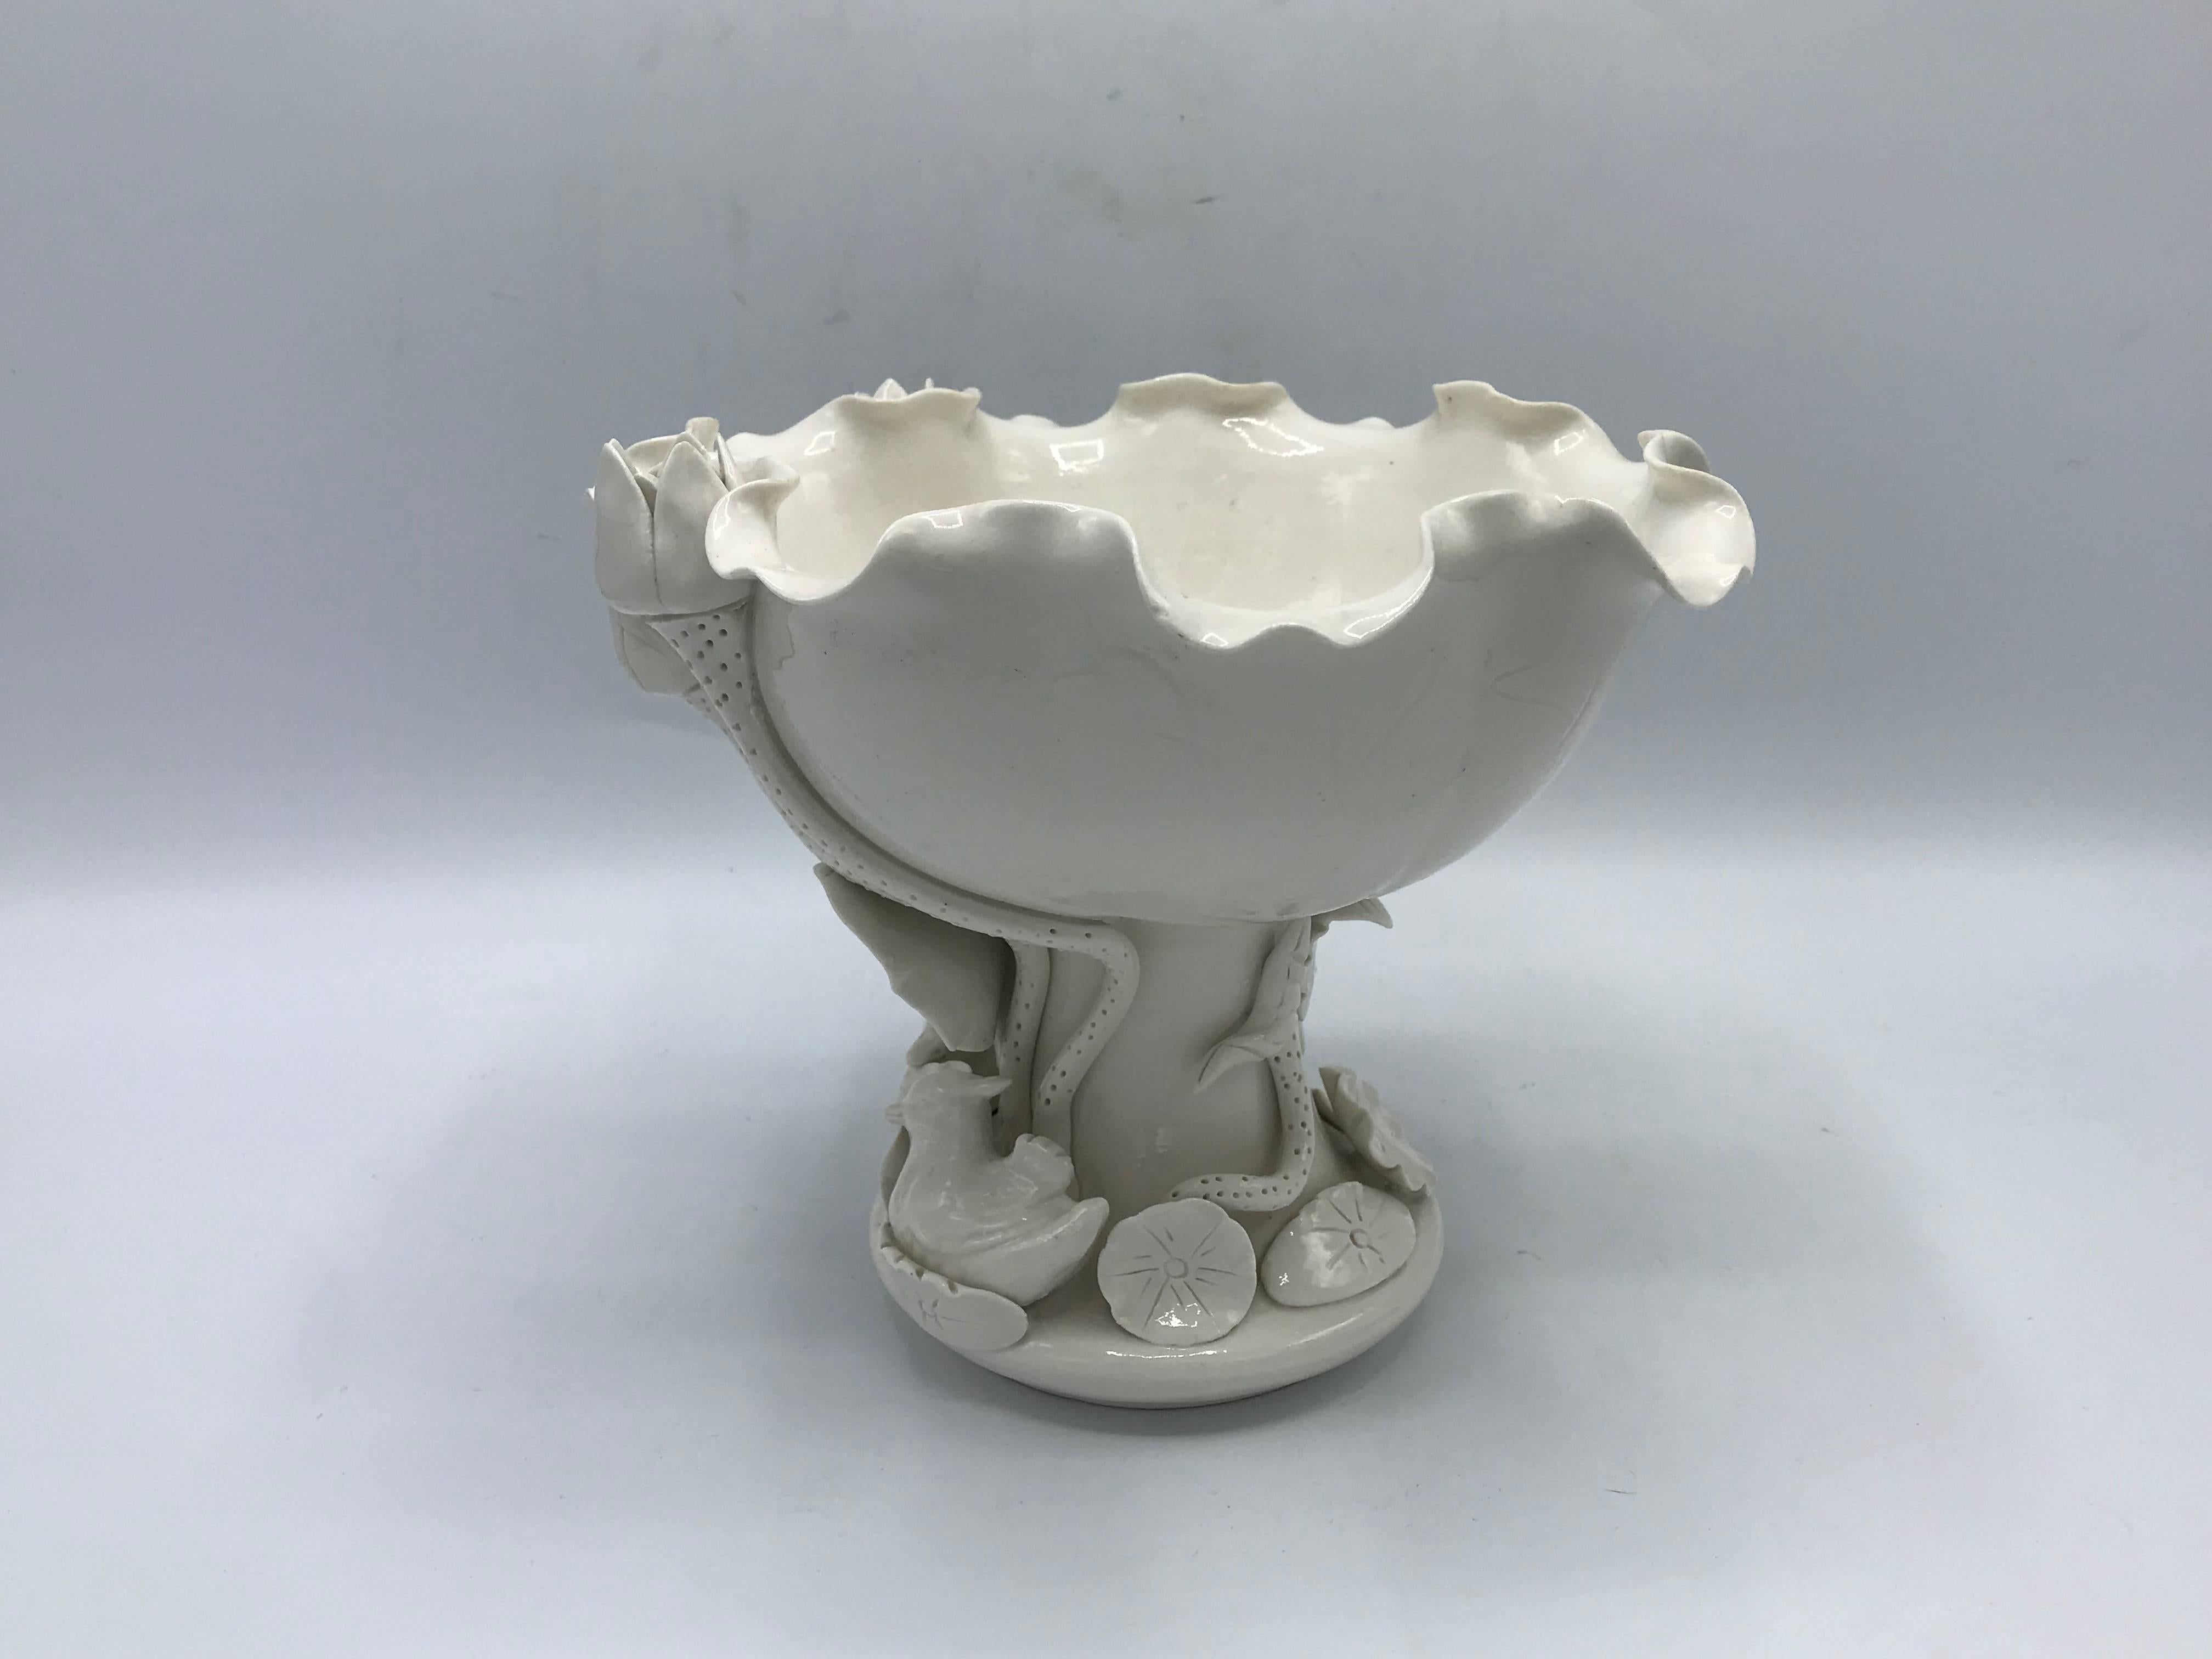 Offered is a stunning, 1960s Italian Blanc de Chine porcelain cachepot bowl. The piece has a beautiful floral motif of lotus flowers and leaves with birds along the base.